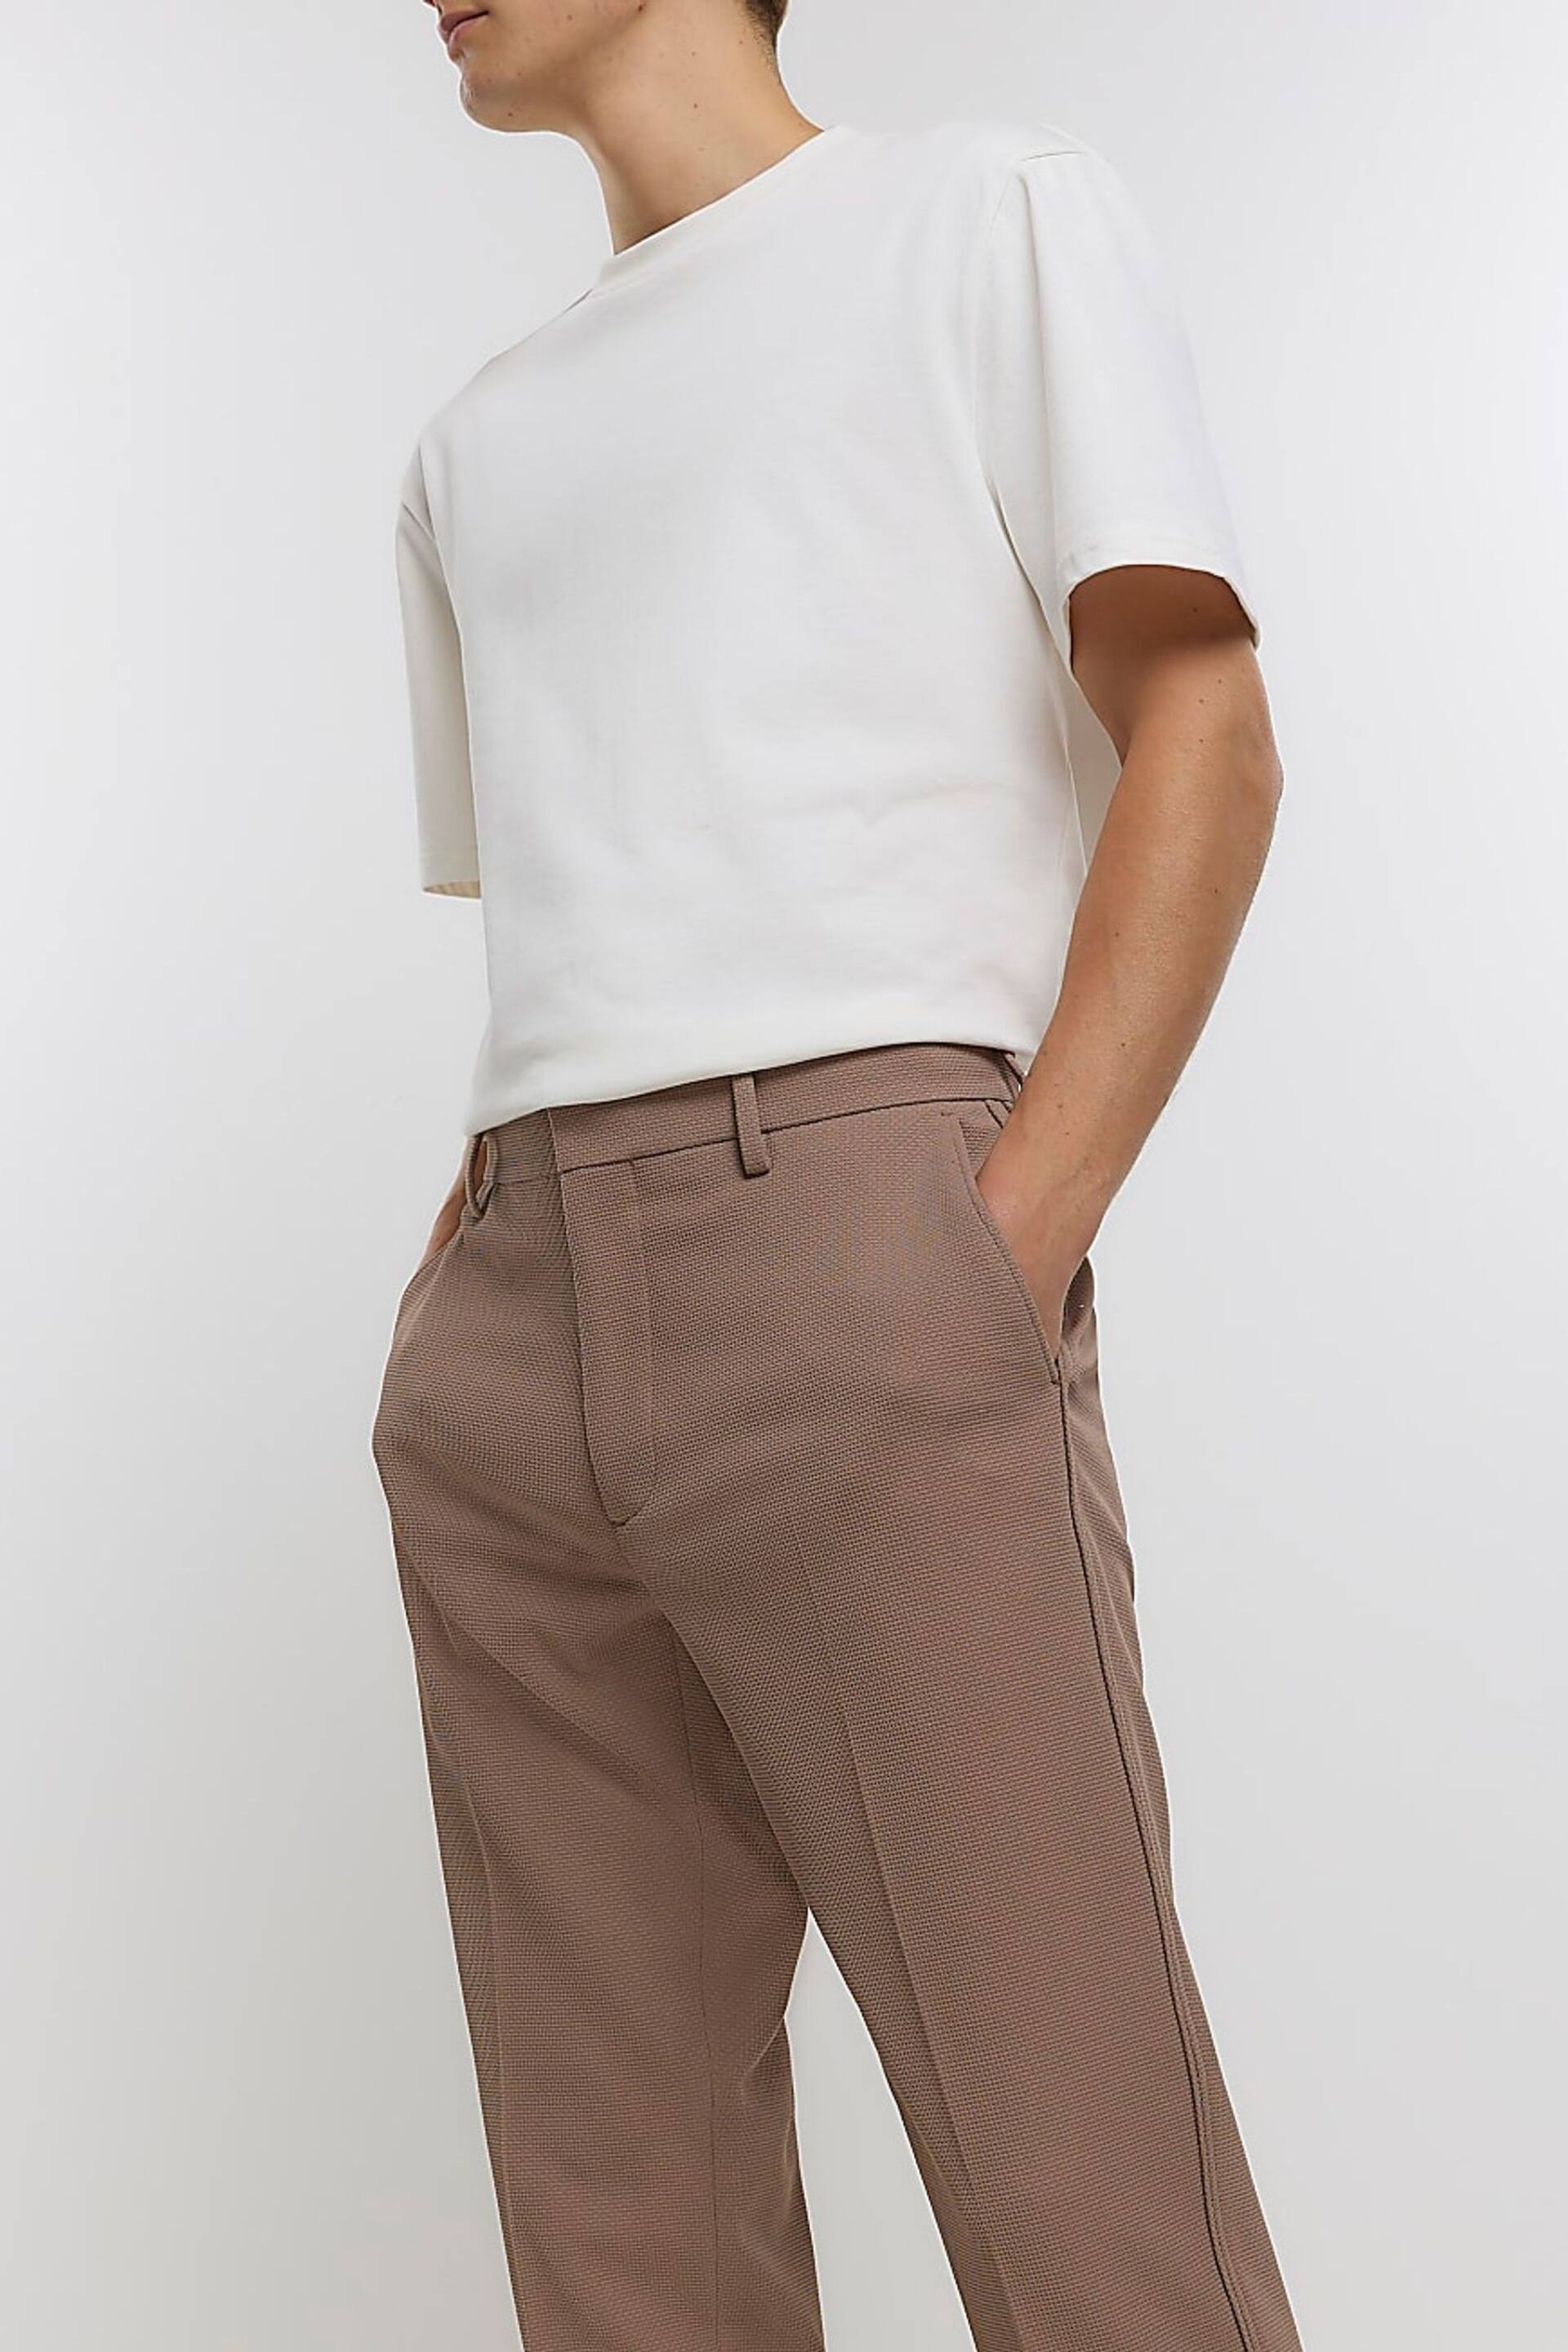 River Island Brown Waffle Smart Trousers - Image 1 of 6